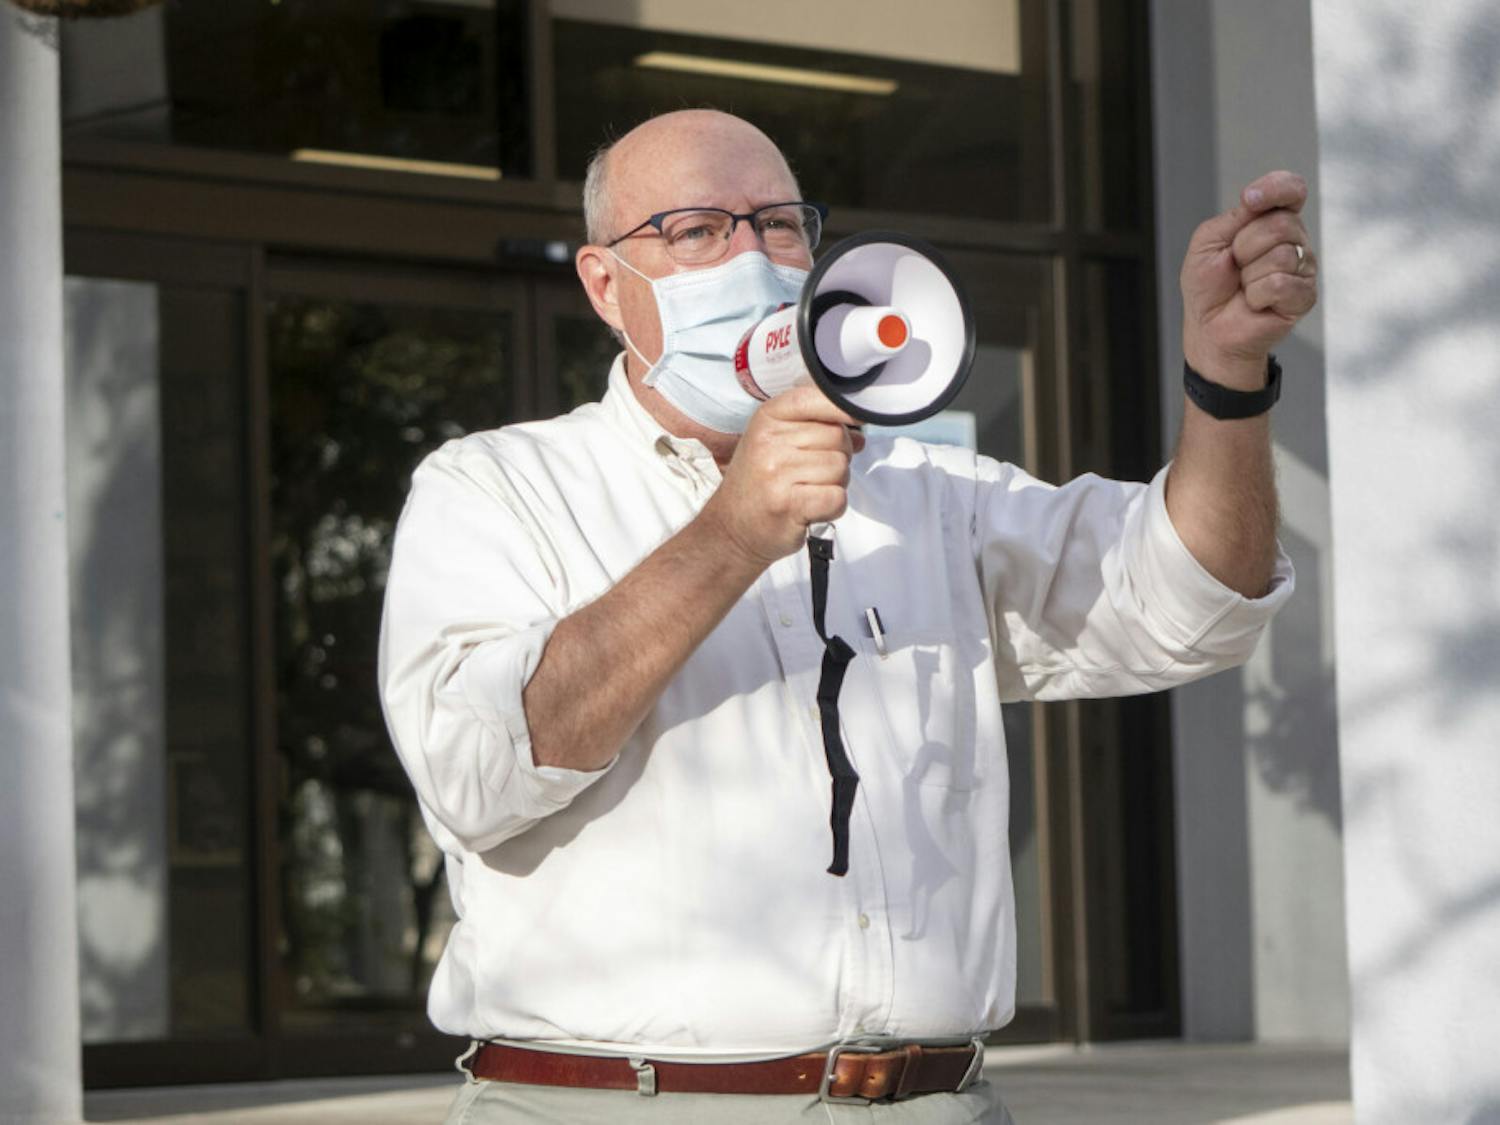 Gainesville Commissioner for district 2, Harvey Ward, is seen giving a short speech during the "Protect the Results" rally held at the Alachua City Hall on Wednesday, Nov. 4, 2020. (Emily Felts/Alligator Staff)